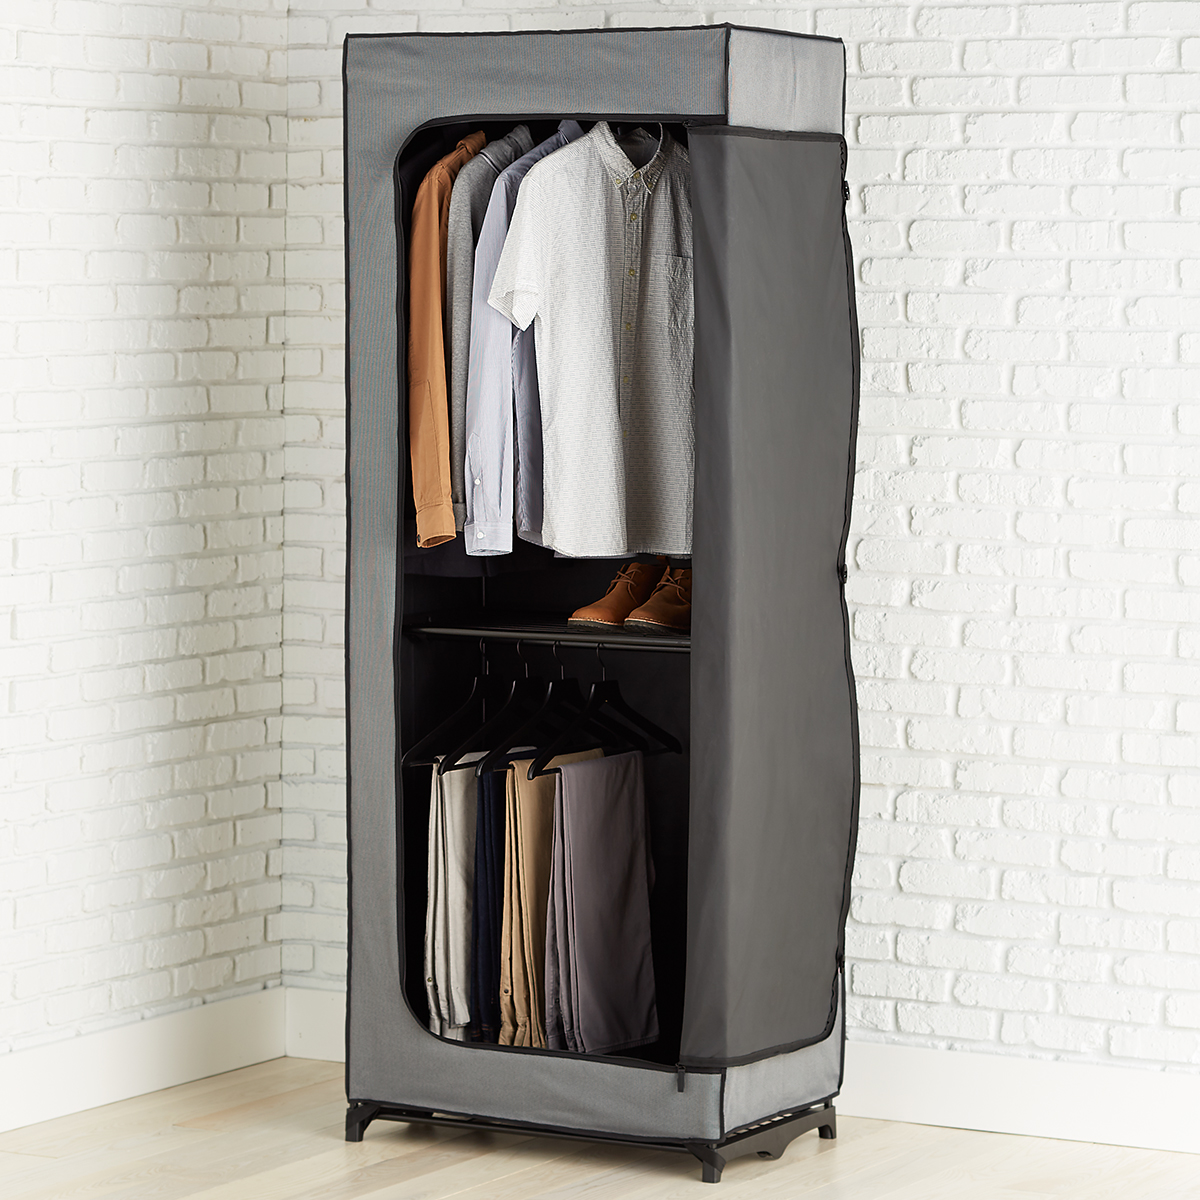 https://www.containerstore.com/catalogimages/372703/10060473-double-hang-clothes-closet-.jpg